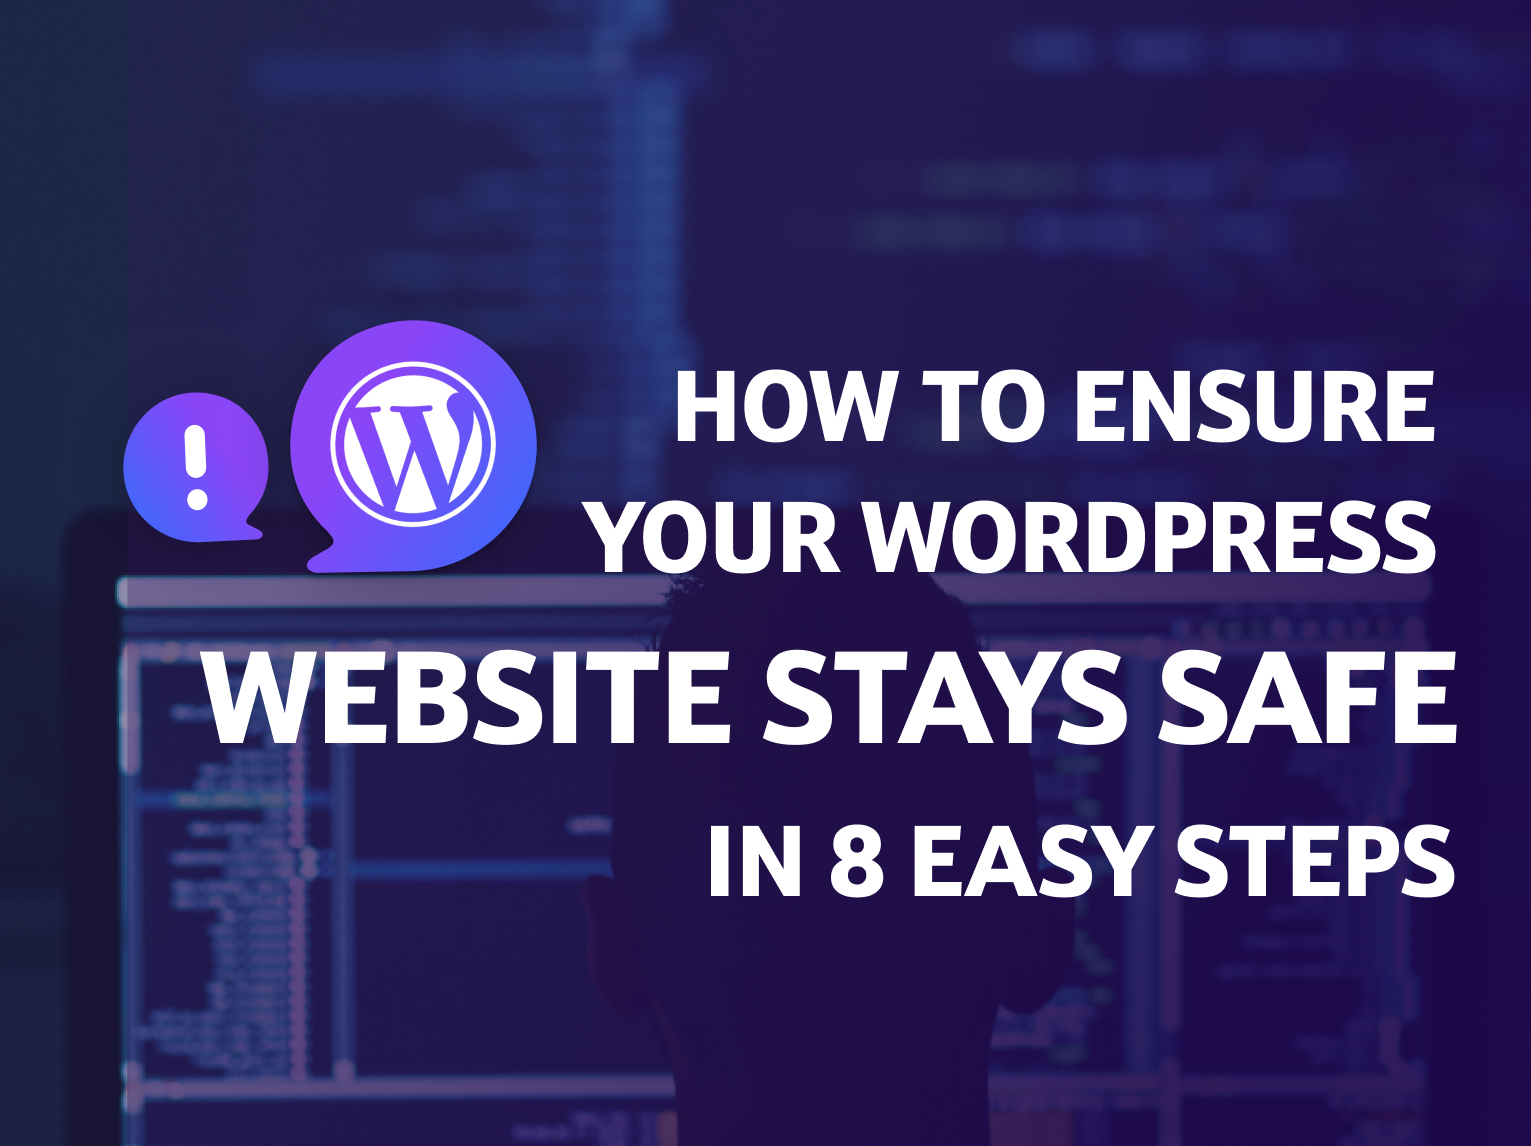 How to ensure your WordPress website stays safe in 8 easy steps